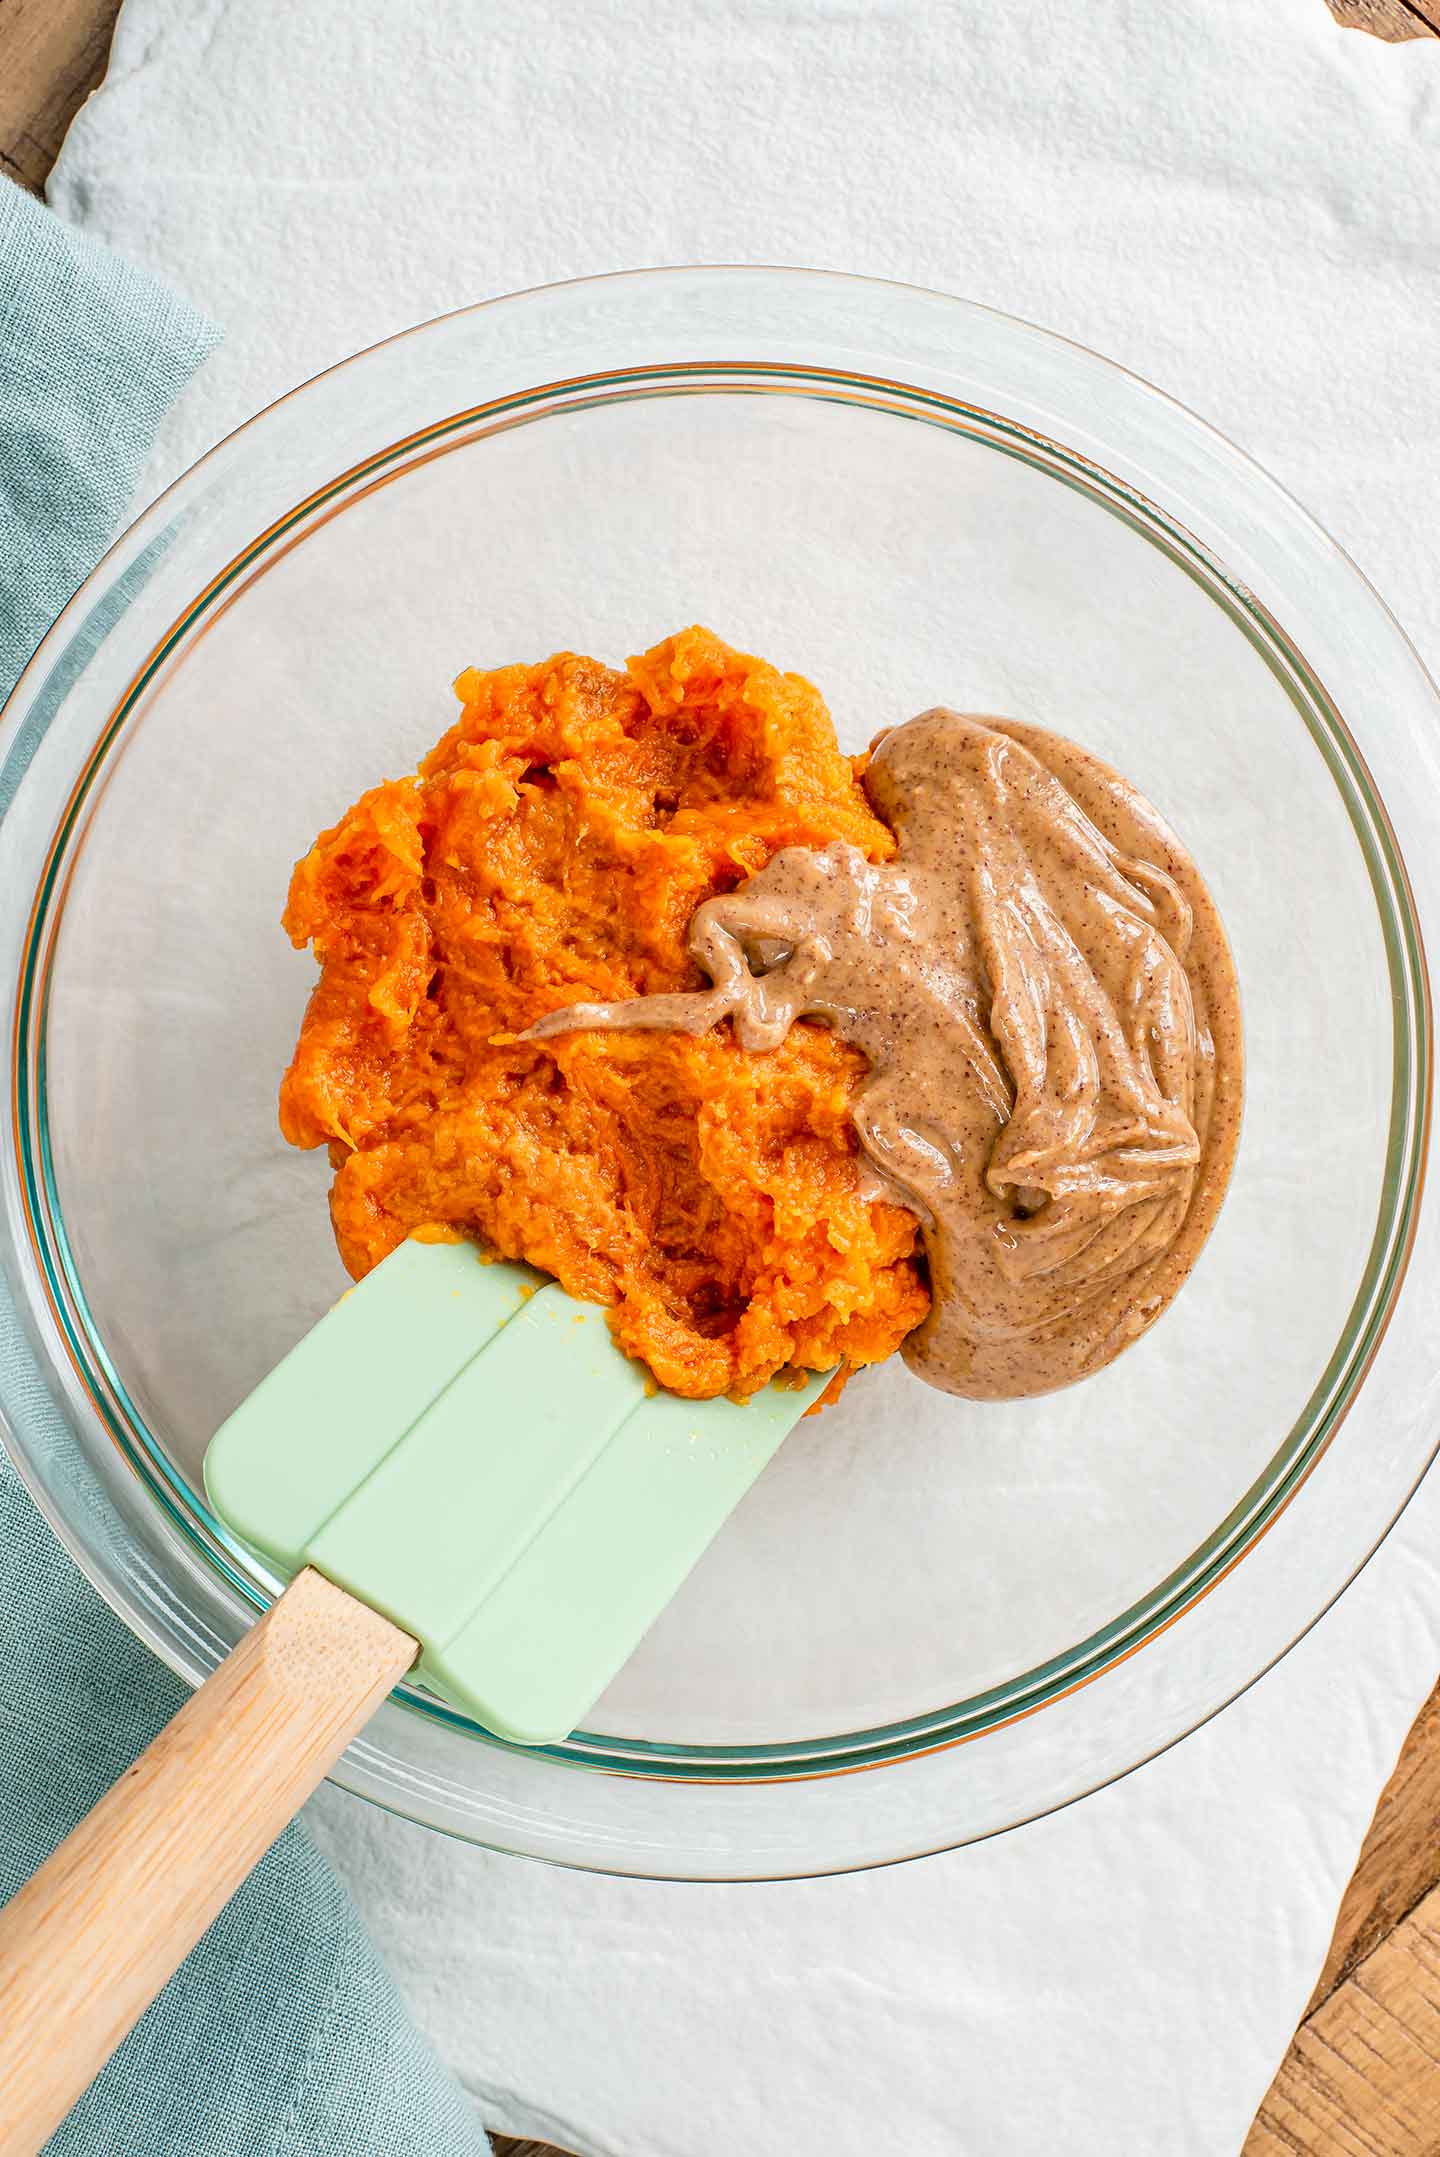 Top down view of mashed sweet potato and runny peanut butter in a glass bowl with a rubber spatula.